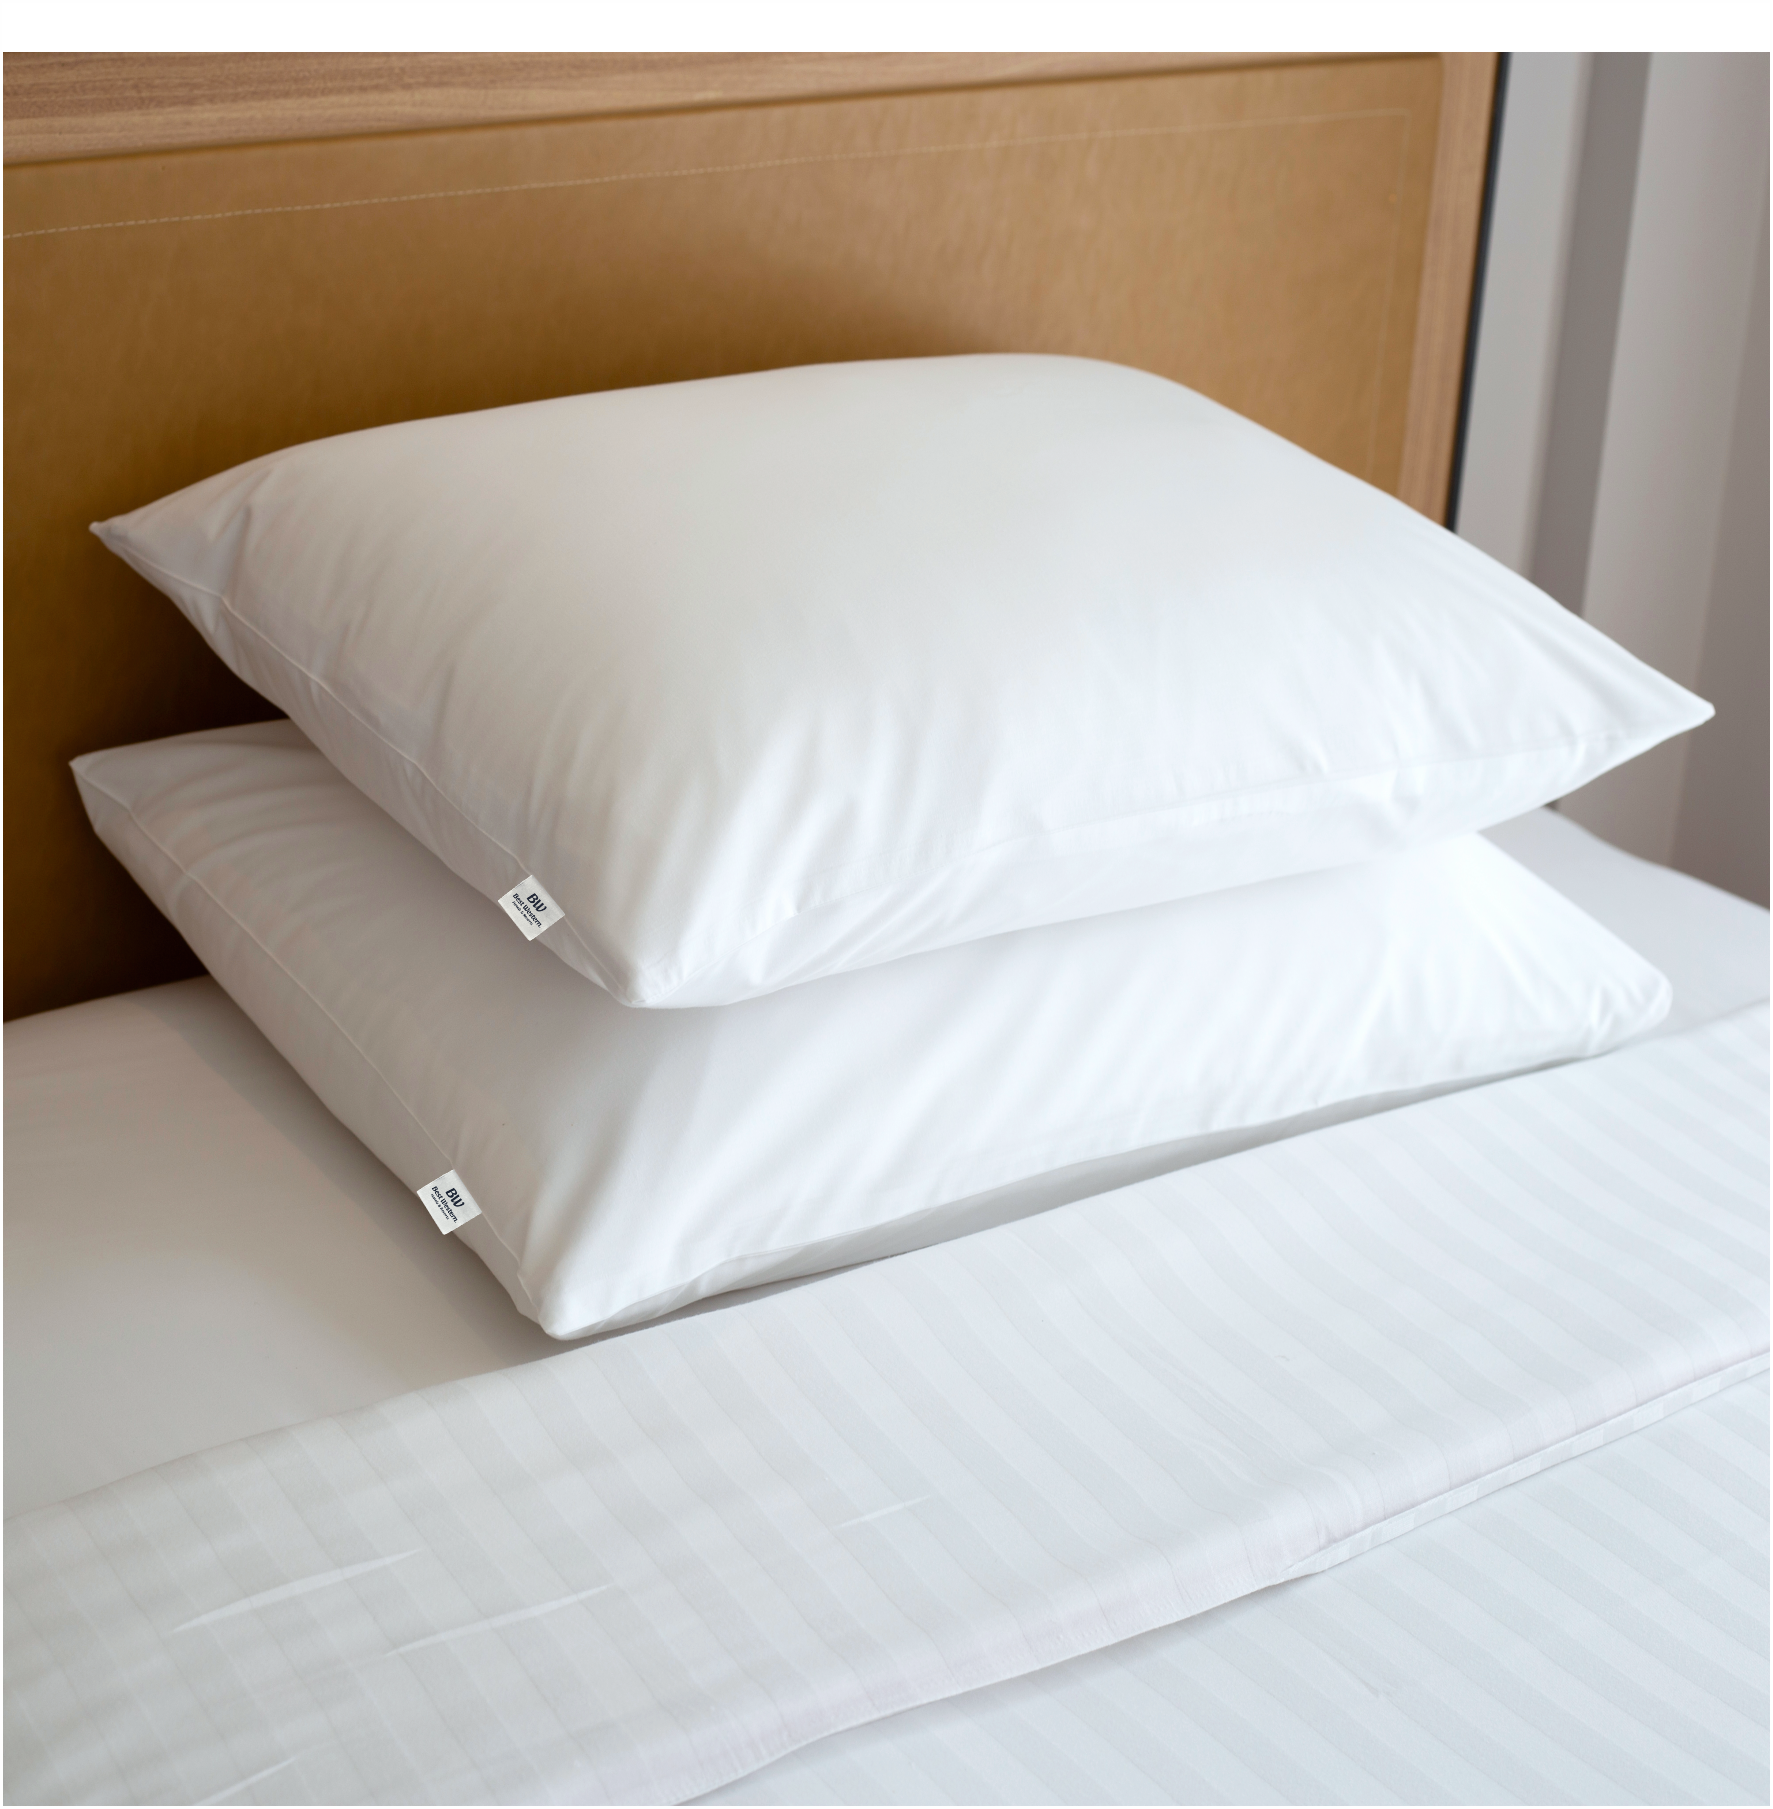 Westin® Heavenly Soft Support Polyester Bed Pillow